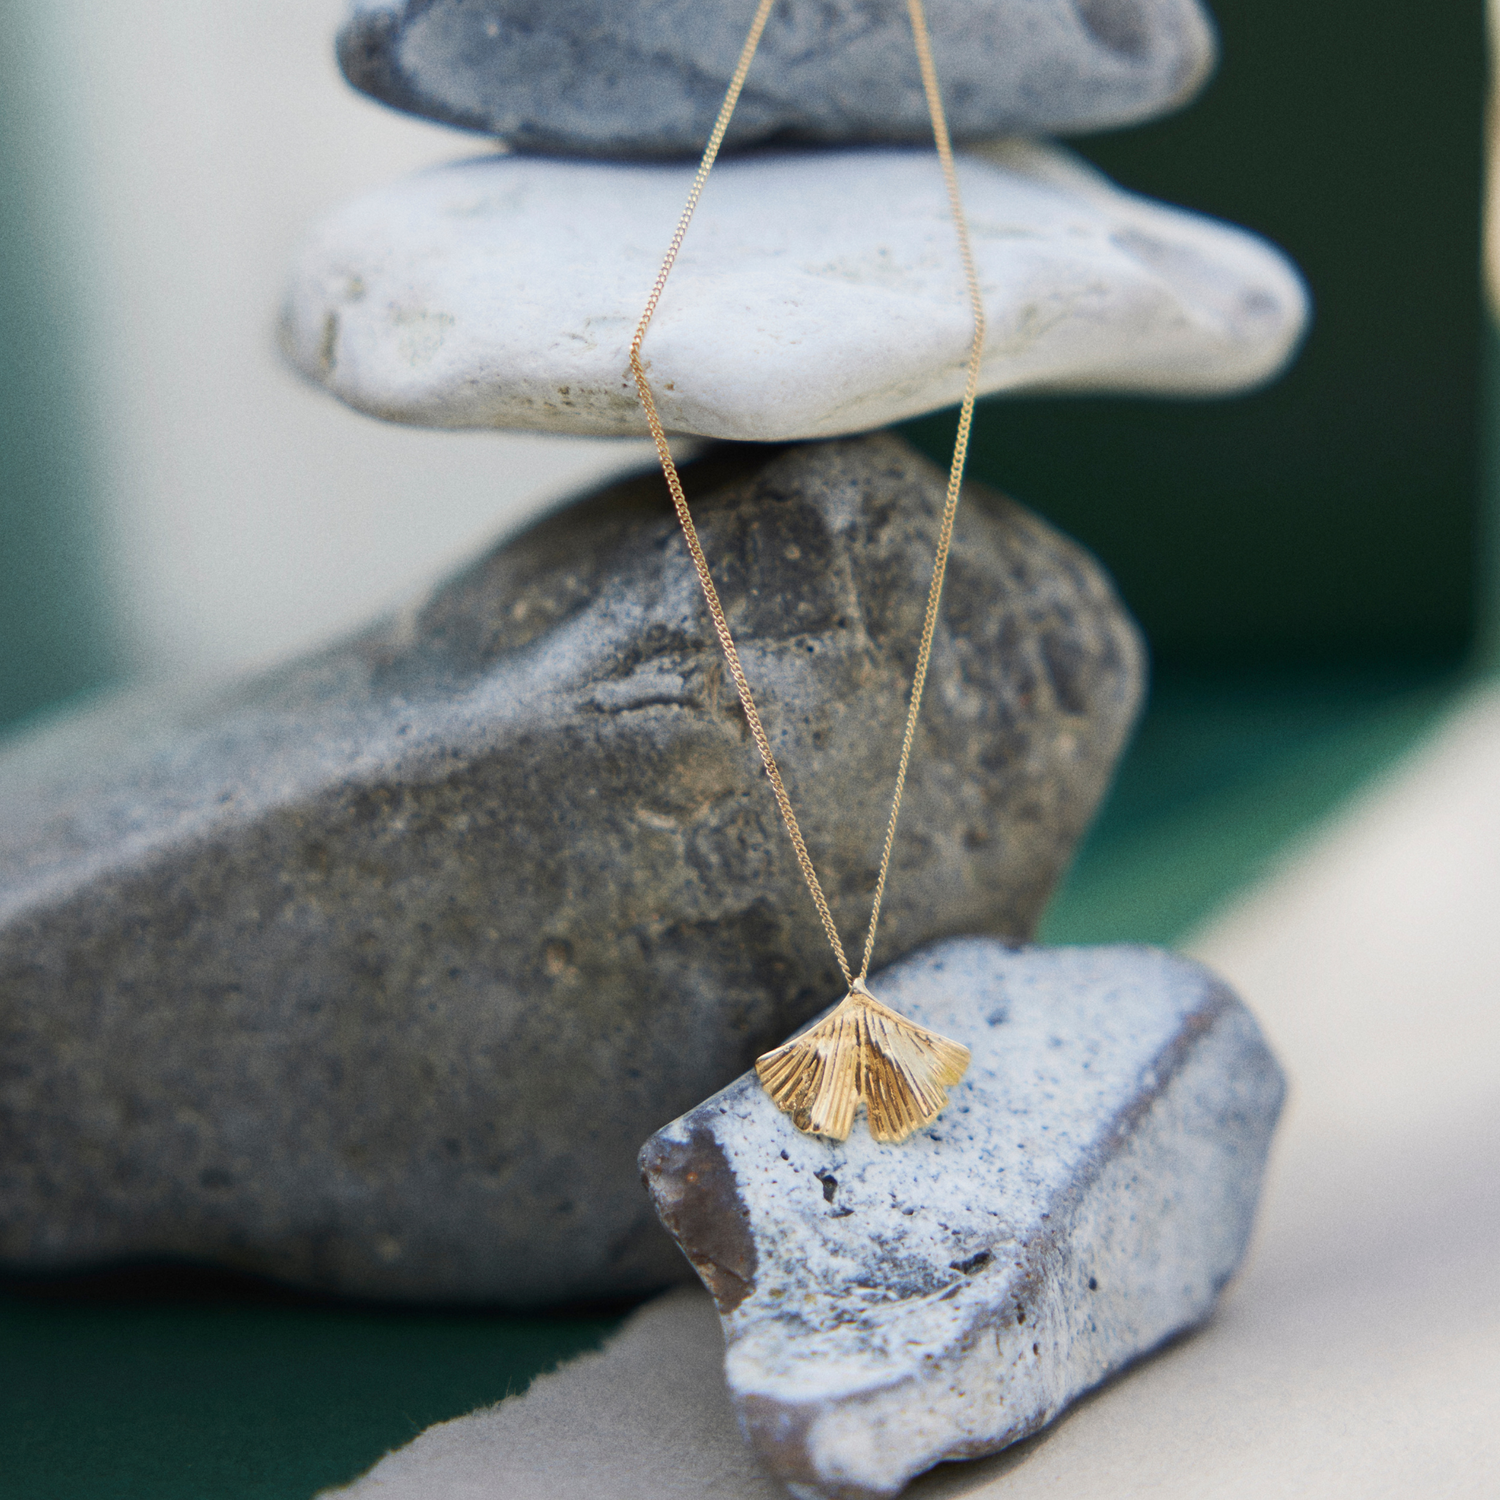 Beautiful exclusive gold necklace with a pendant shaped as a Ginkgo Biloba leaf balancing on an elegant pile of rocks. 18 karat, recycled solid gold.